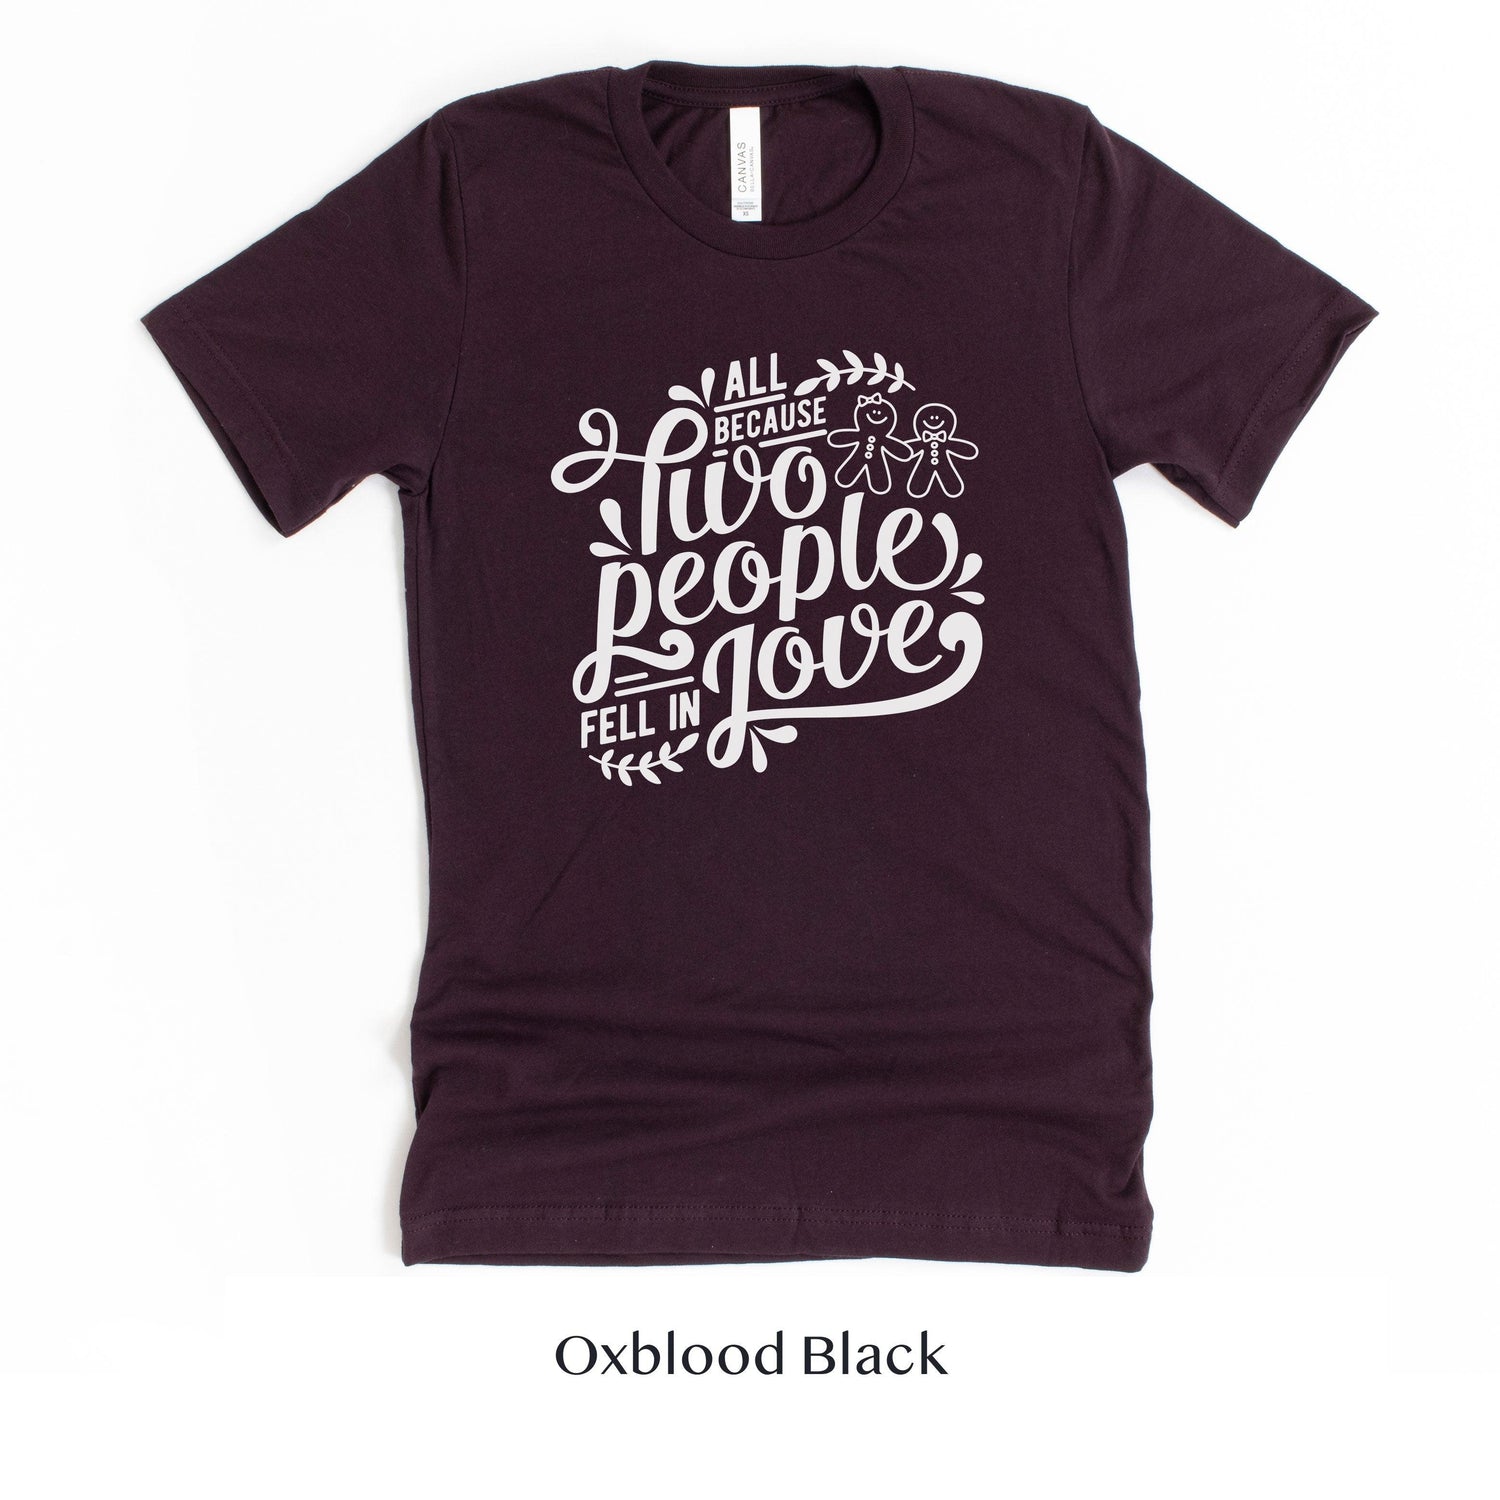 All Because Two People Fell In Love Gingerbread Men - Christmas Wedding Unisex t-shirt by Oaklynn Lane - Oxblood Deep Red Shirt